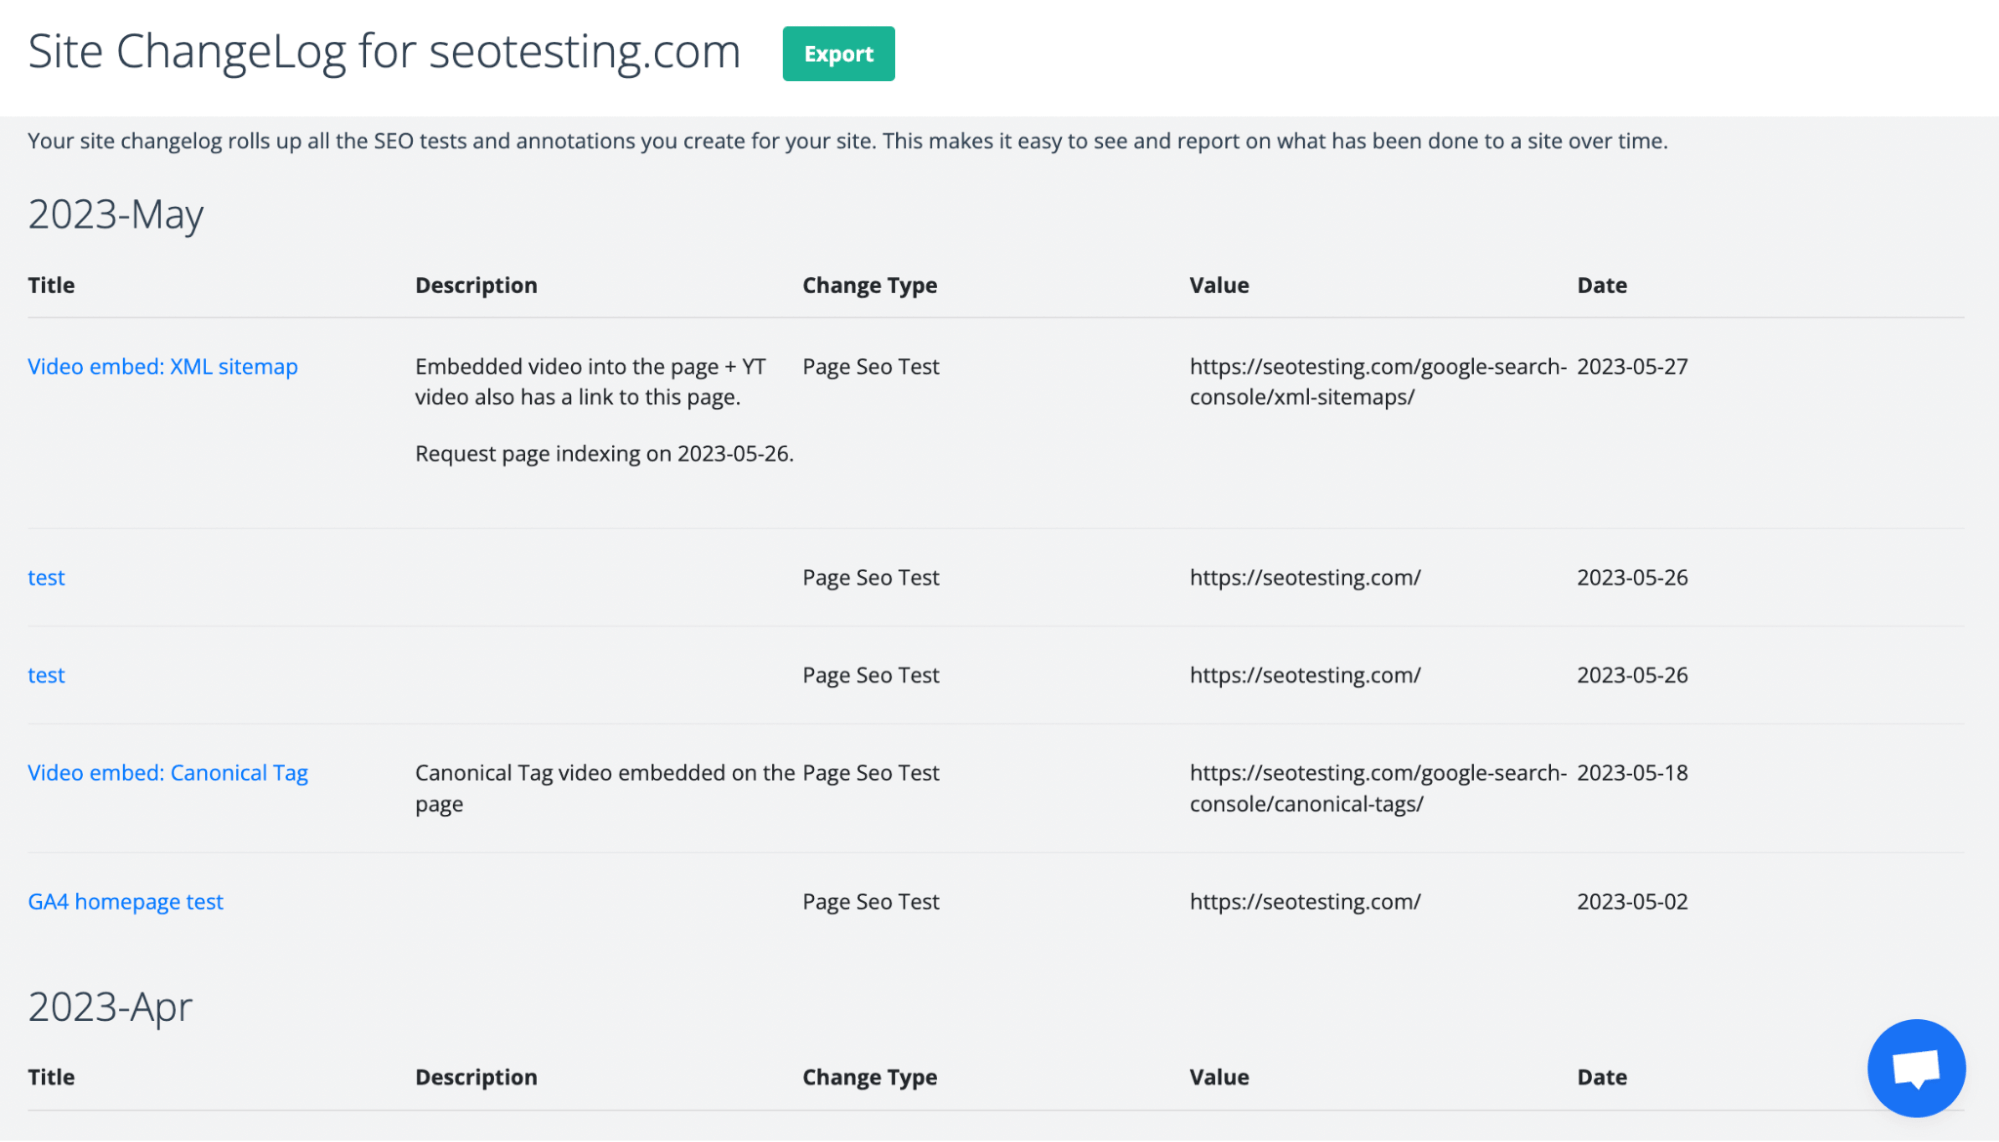 SEOTesting Site Changelog allows to keep a timeline track of work done on the website.